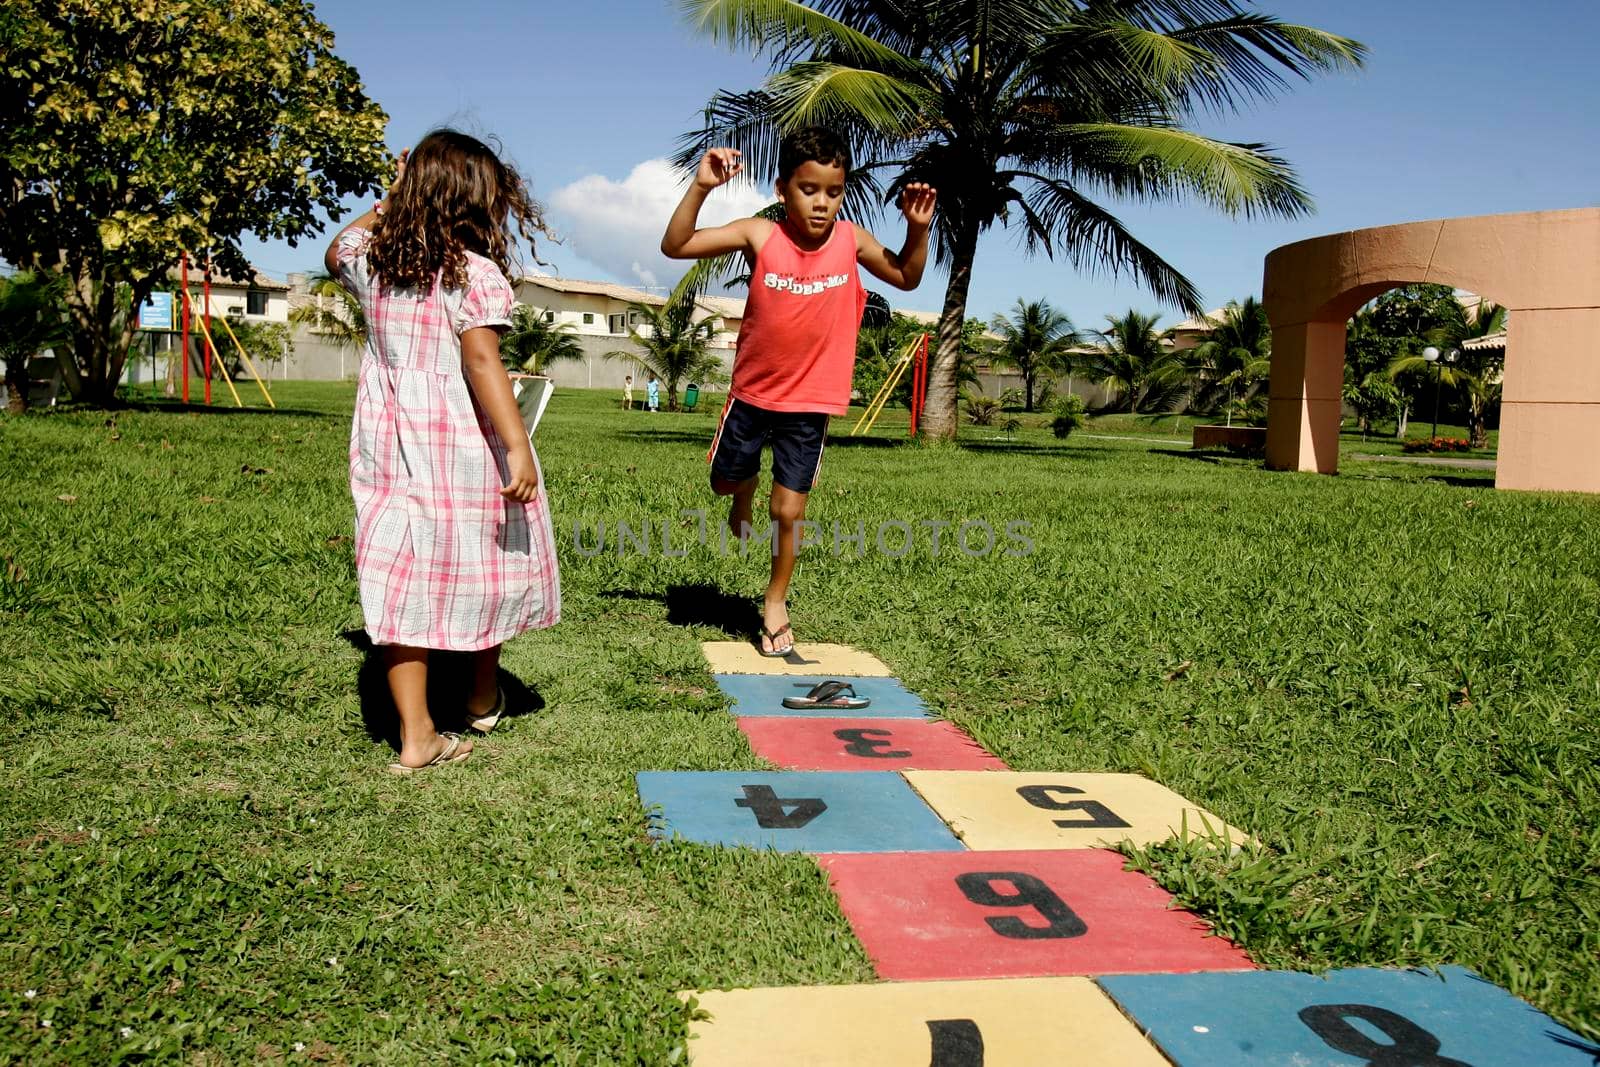 salvador, bahia / brazil - june 27, 2009: crinaça is seen playing with hopscotch game in a condominium boat in the city of Salvador.





